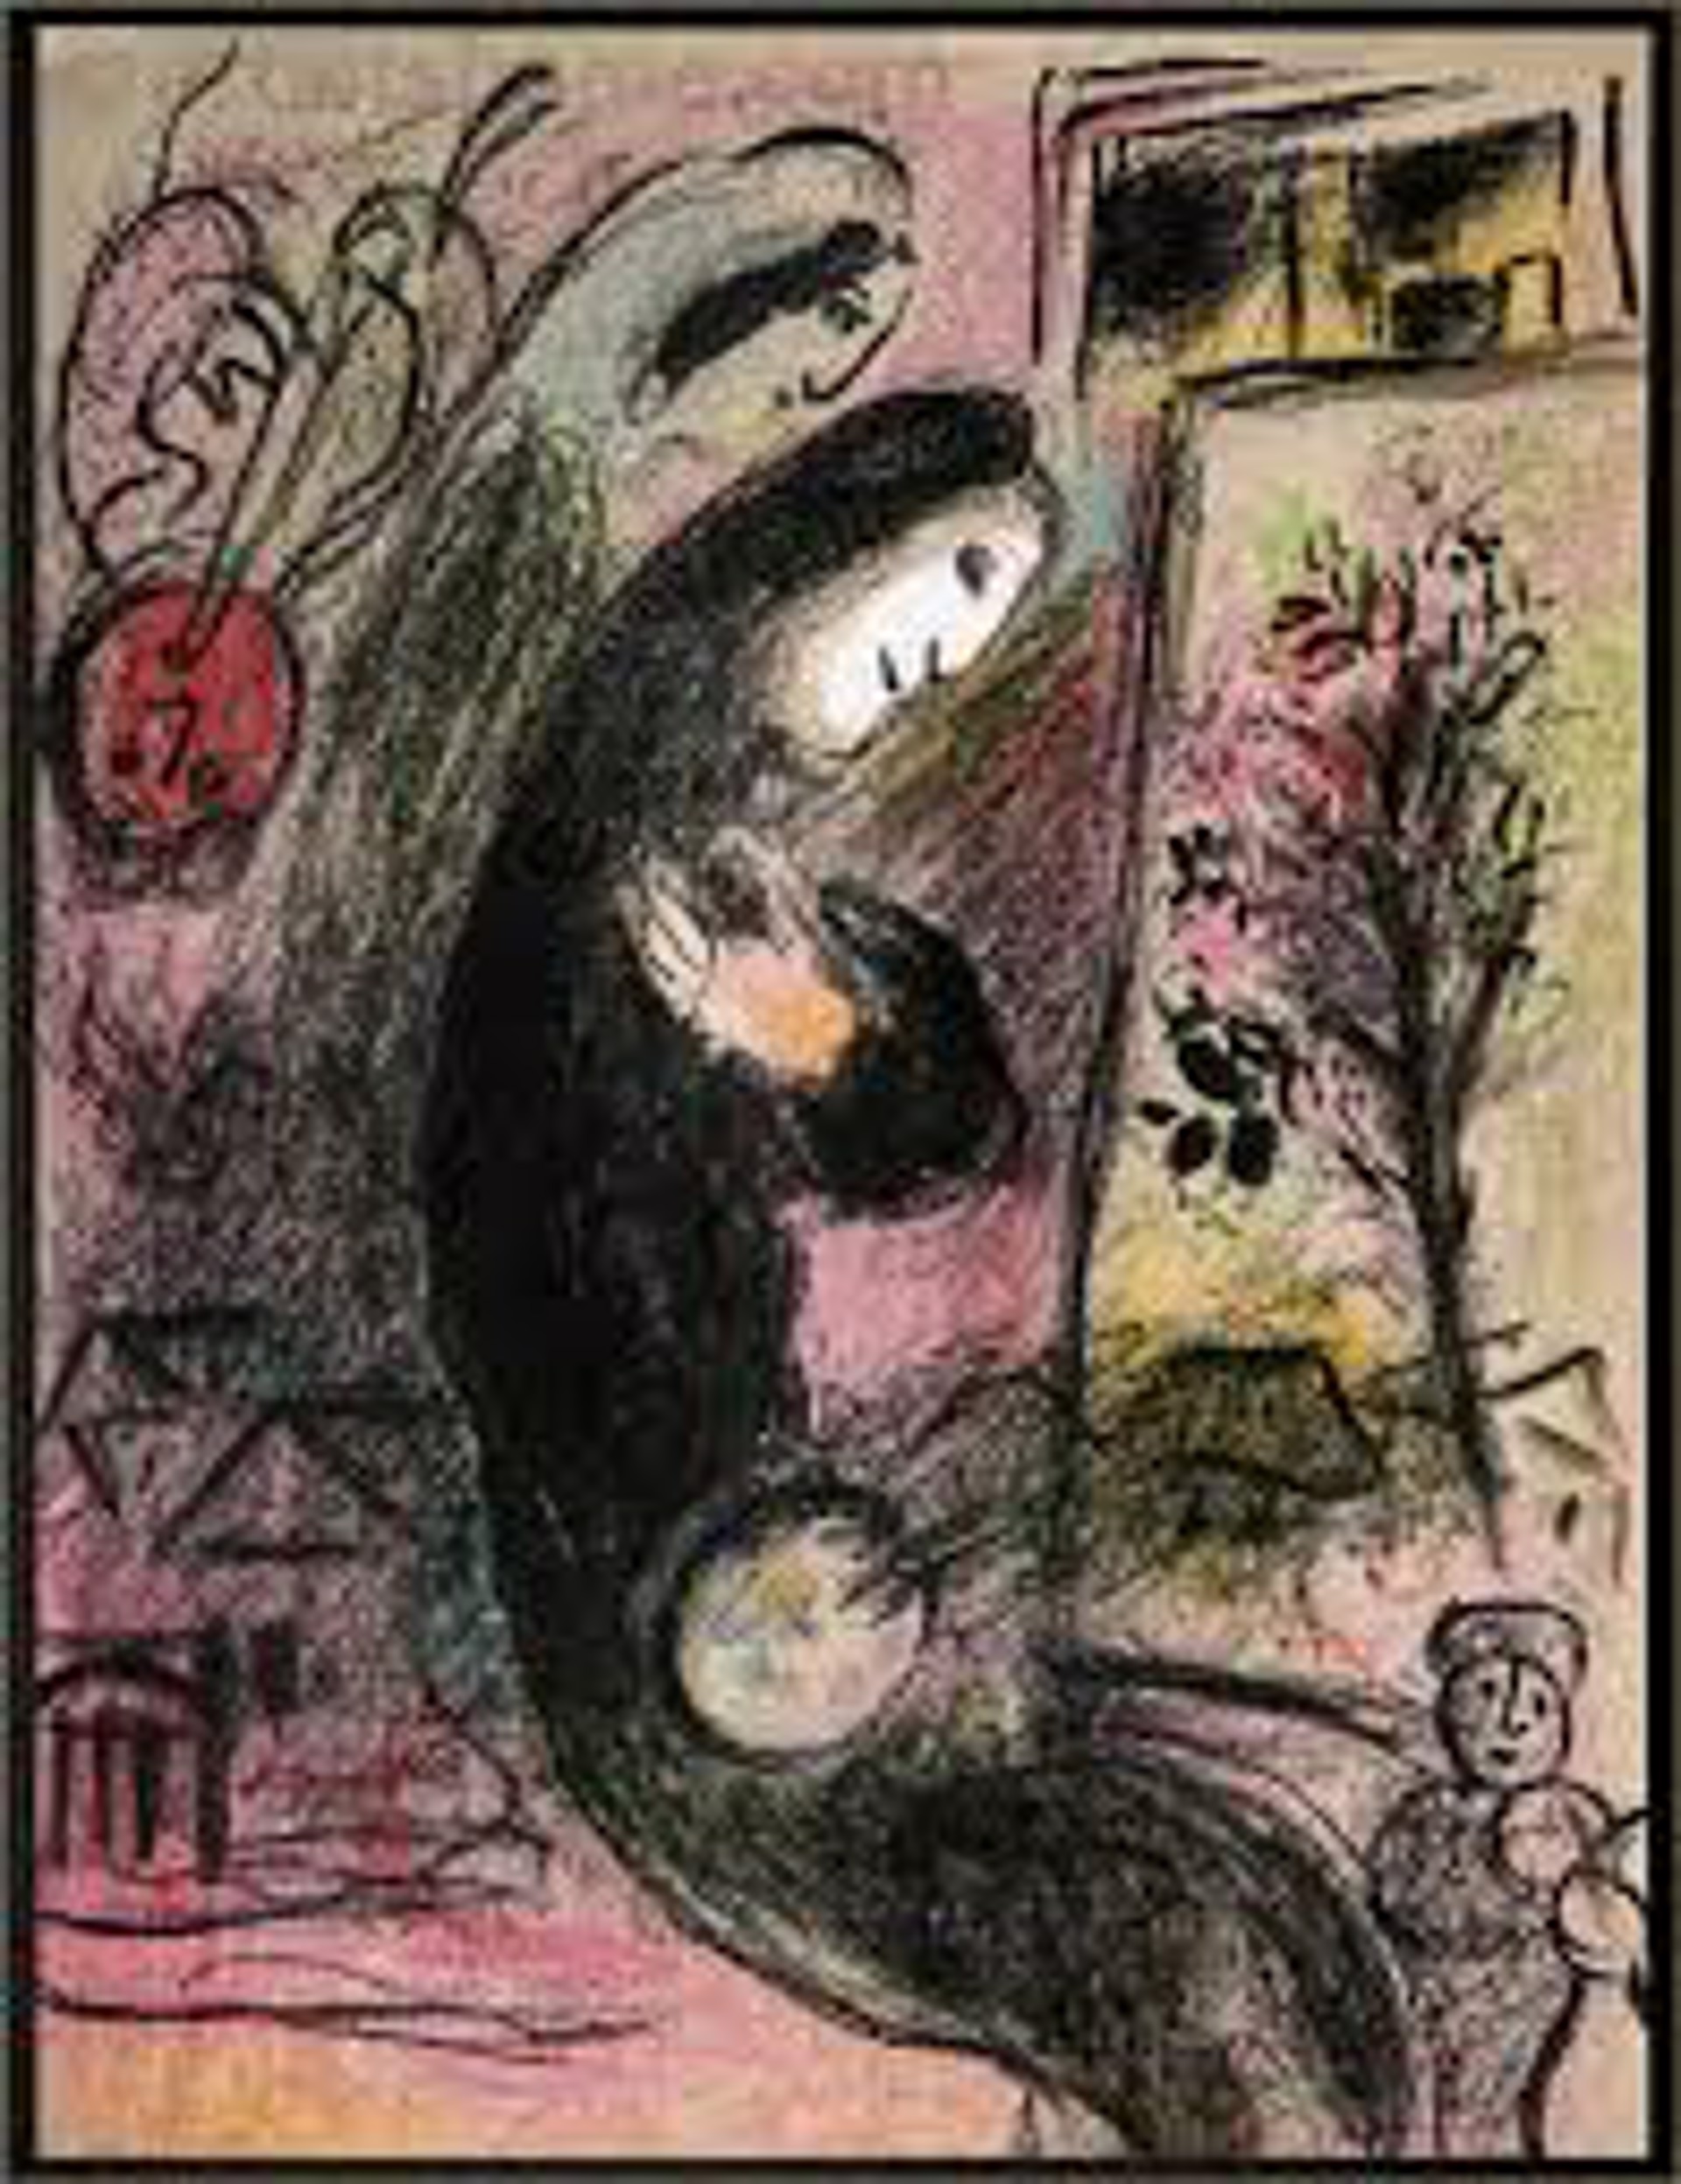 Book Edition, artist by Marc Chagall